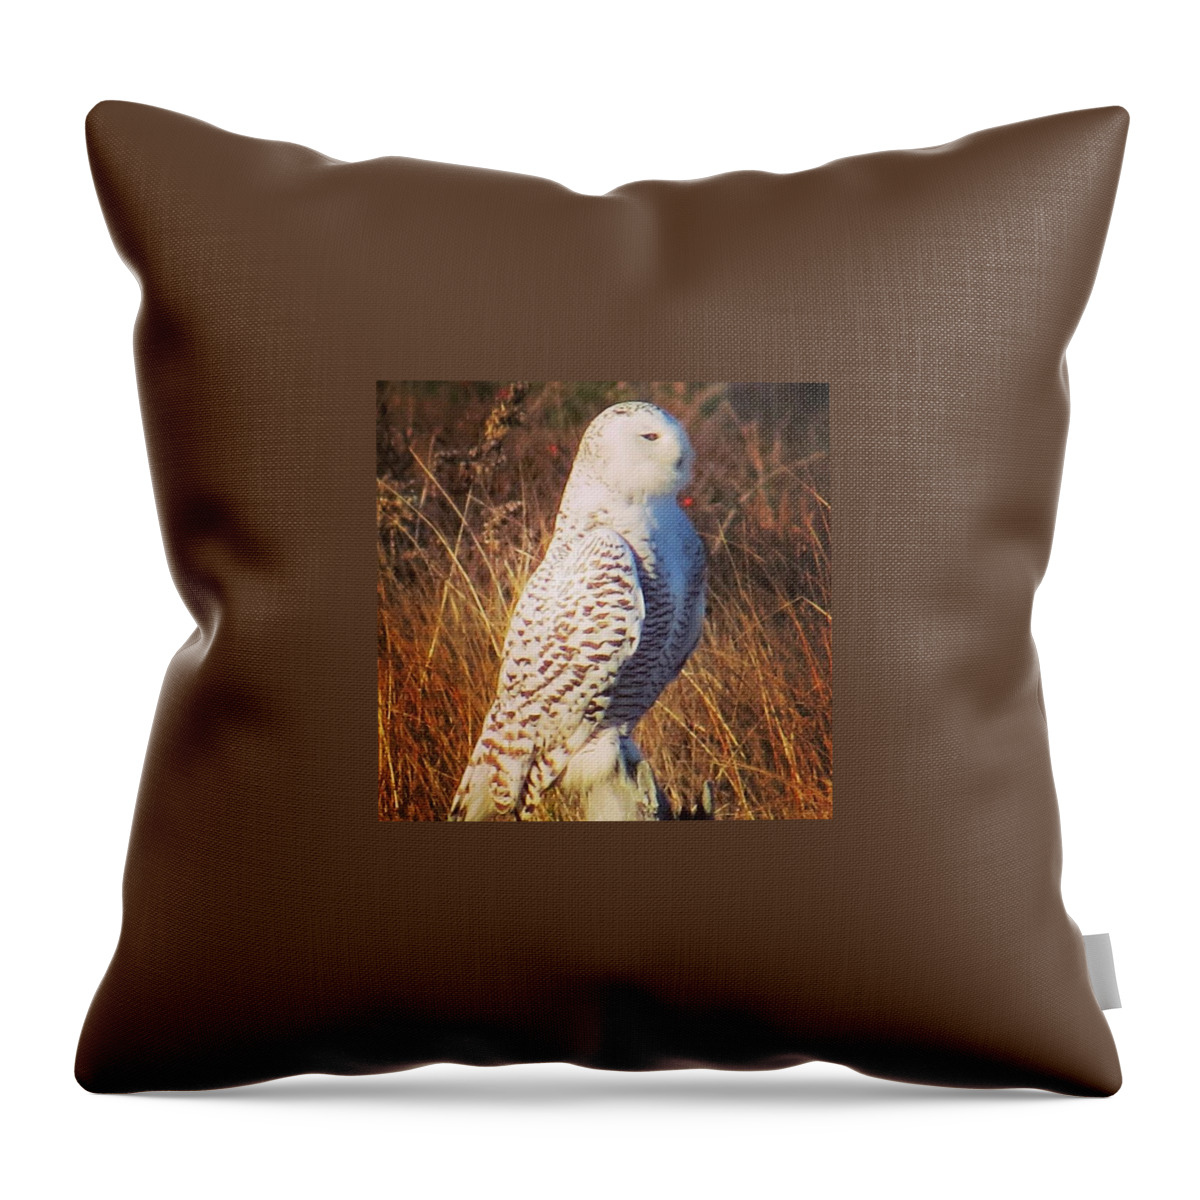 Birding Throw Pillow featuring the photograph Mr Snowy Owl This Morning They Are by John Repoza